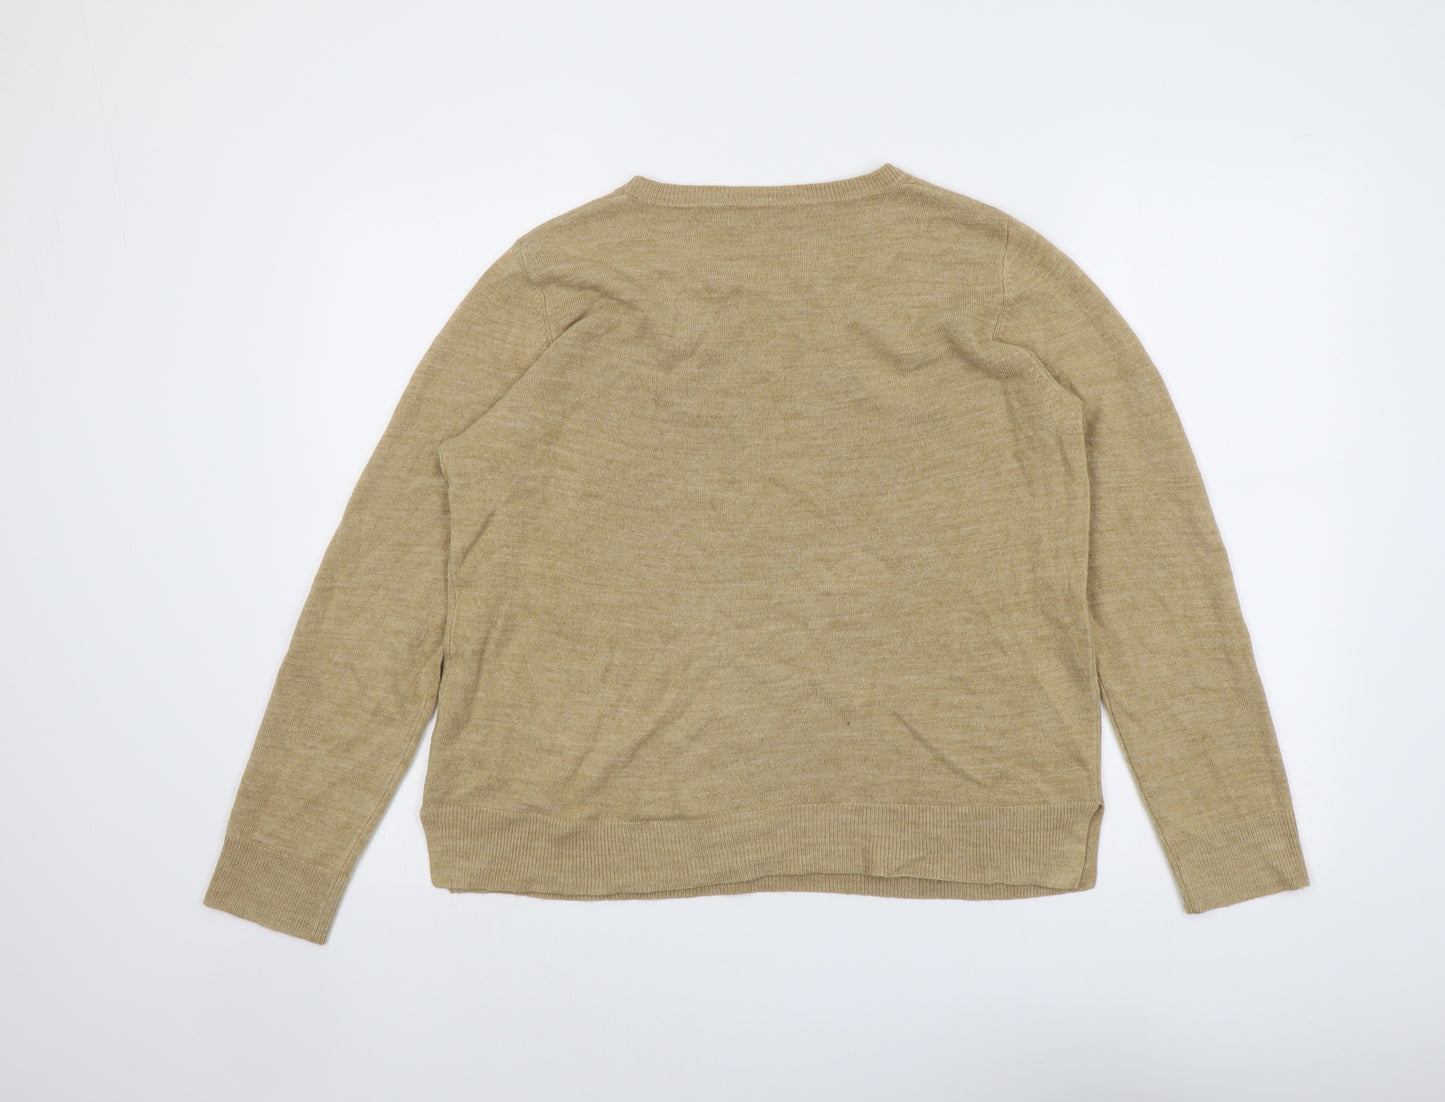 Marks and Spencer Womens Beige Round Neck Acrylic Pullover Jumper Size 16